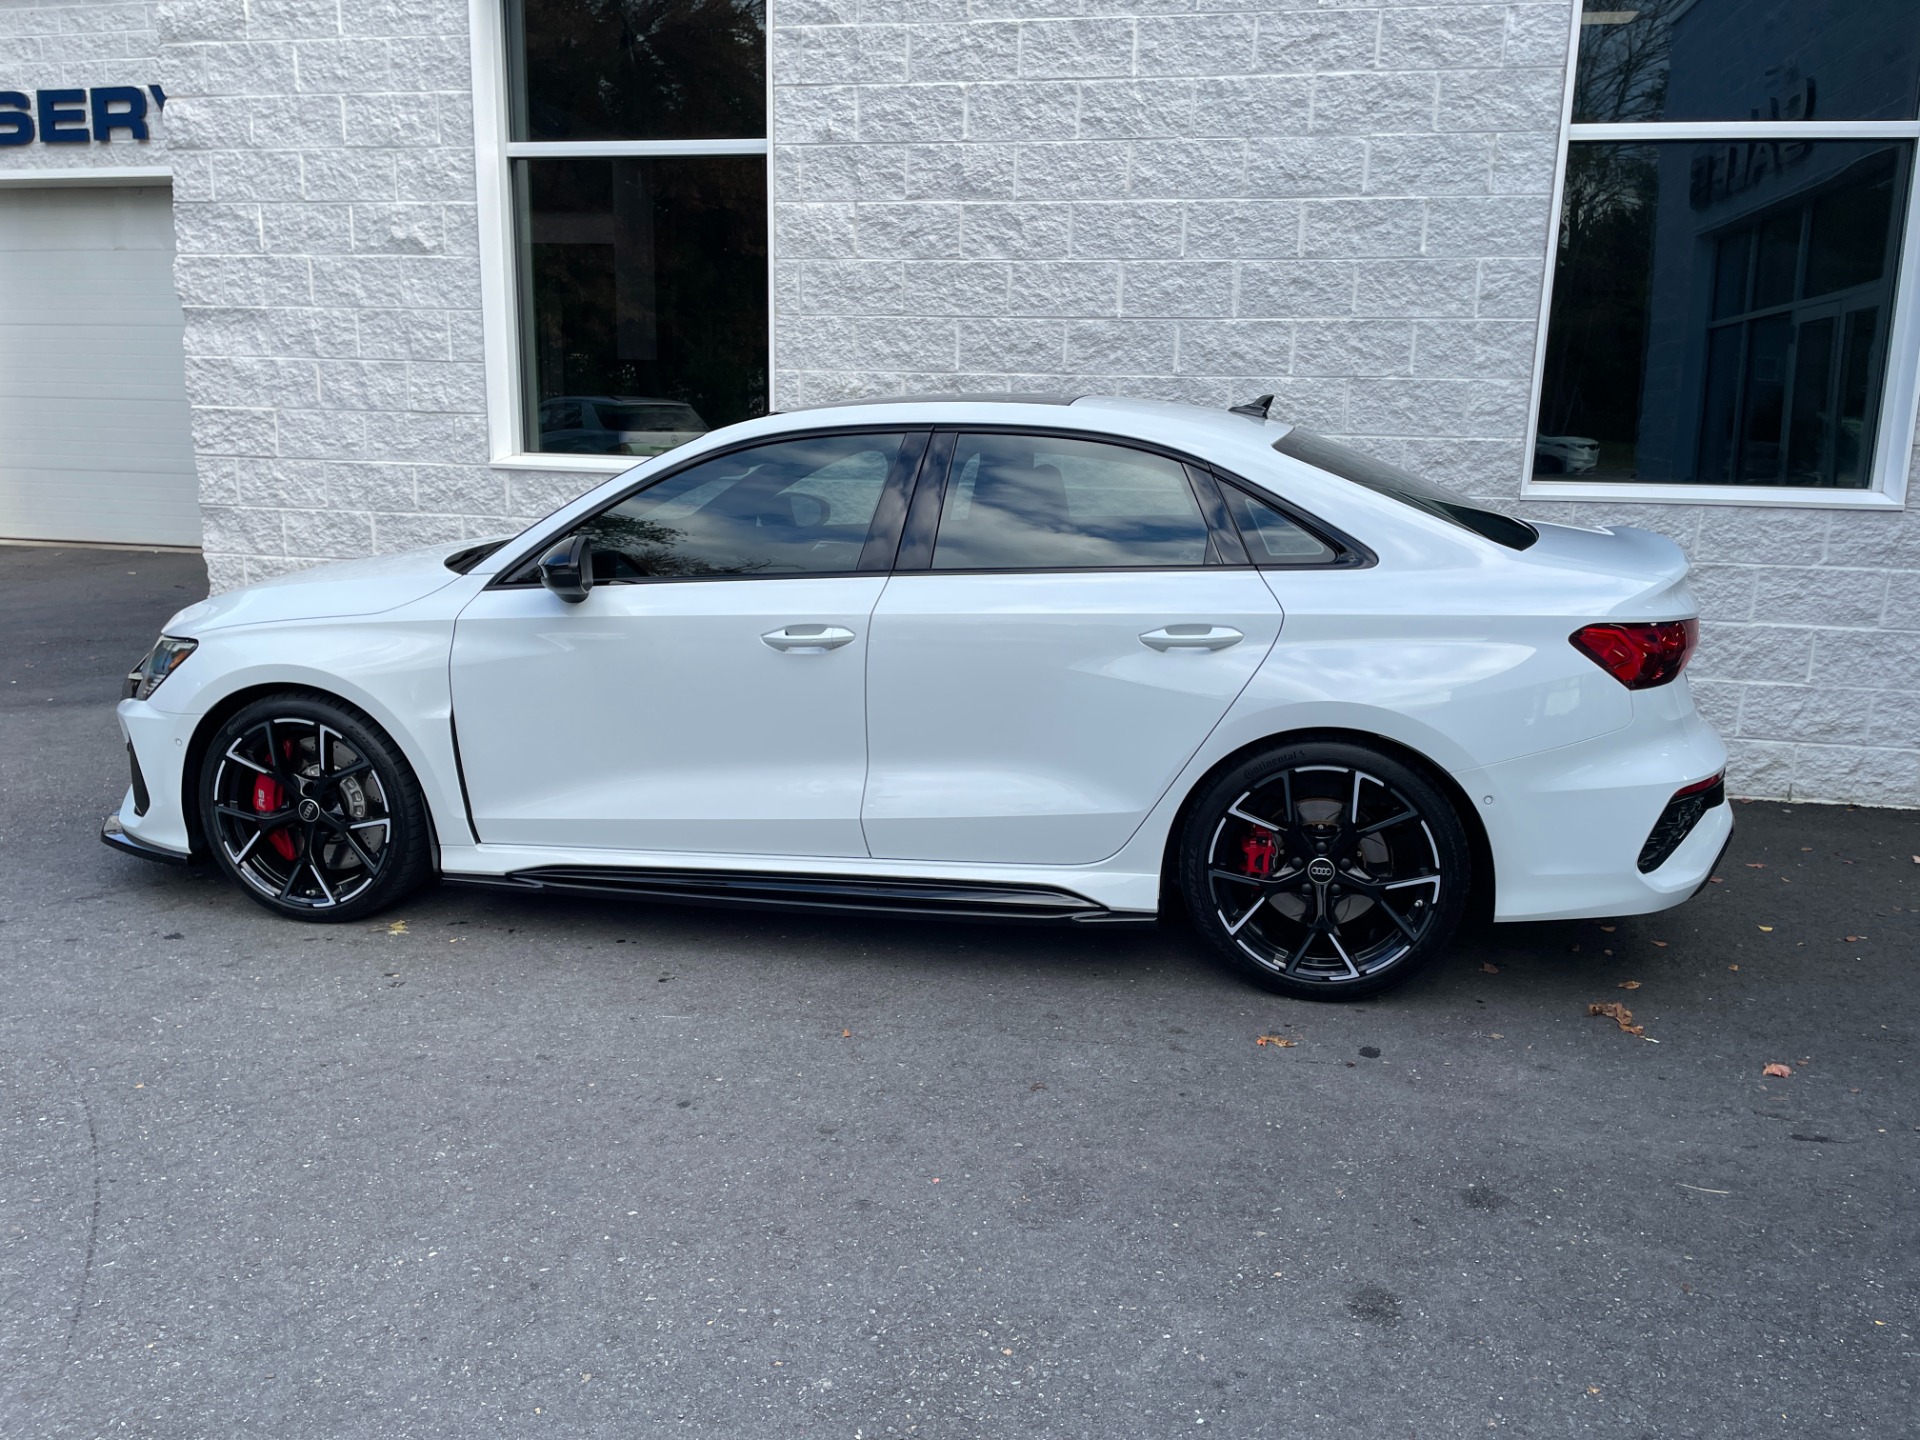 Used Petrol Audi RS3 Saloon Cars For Sale